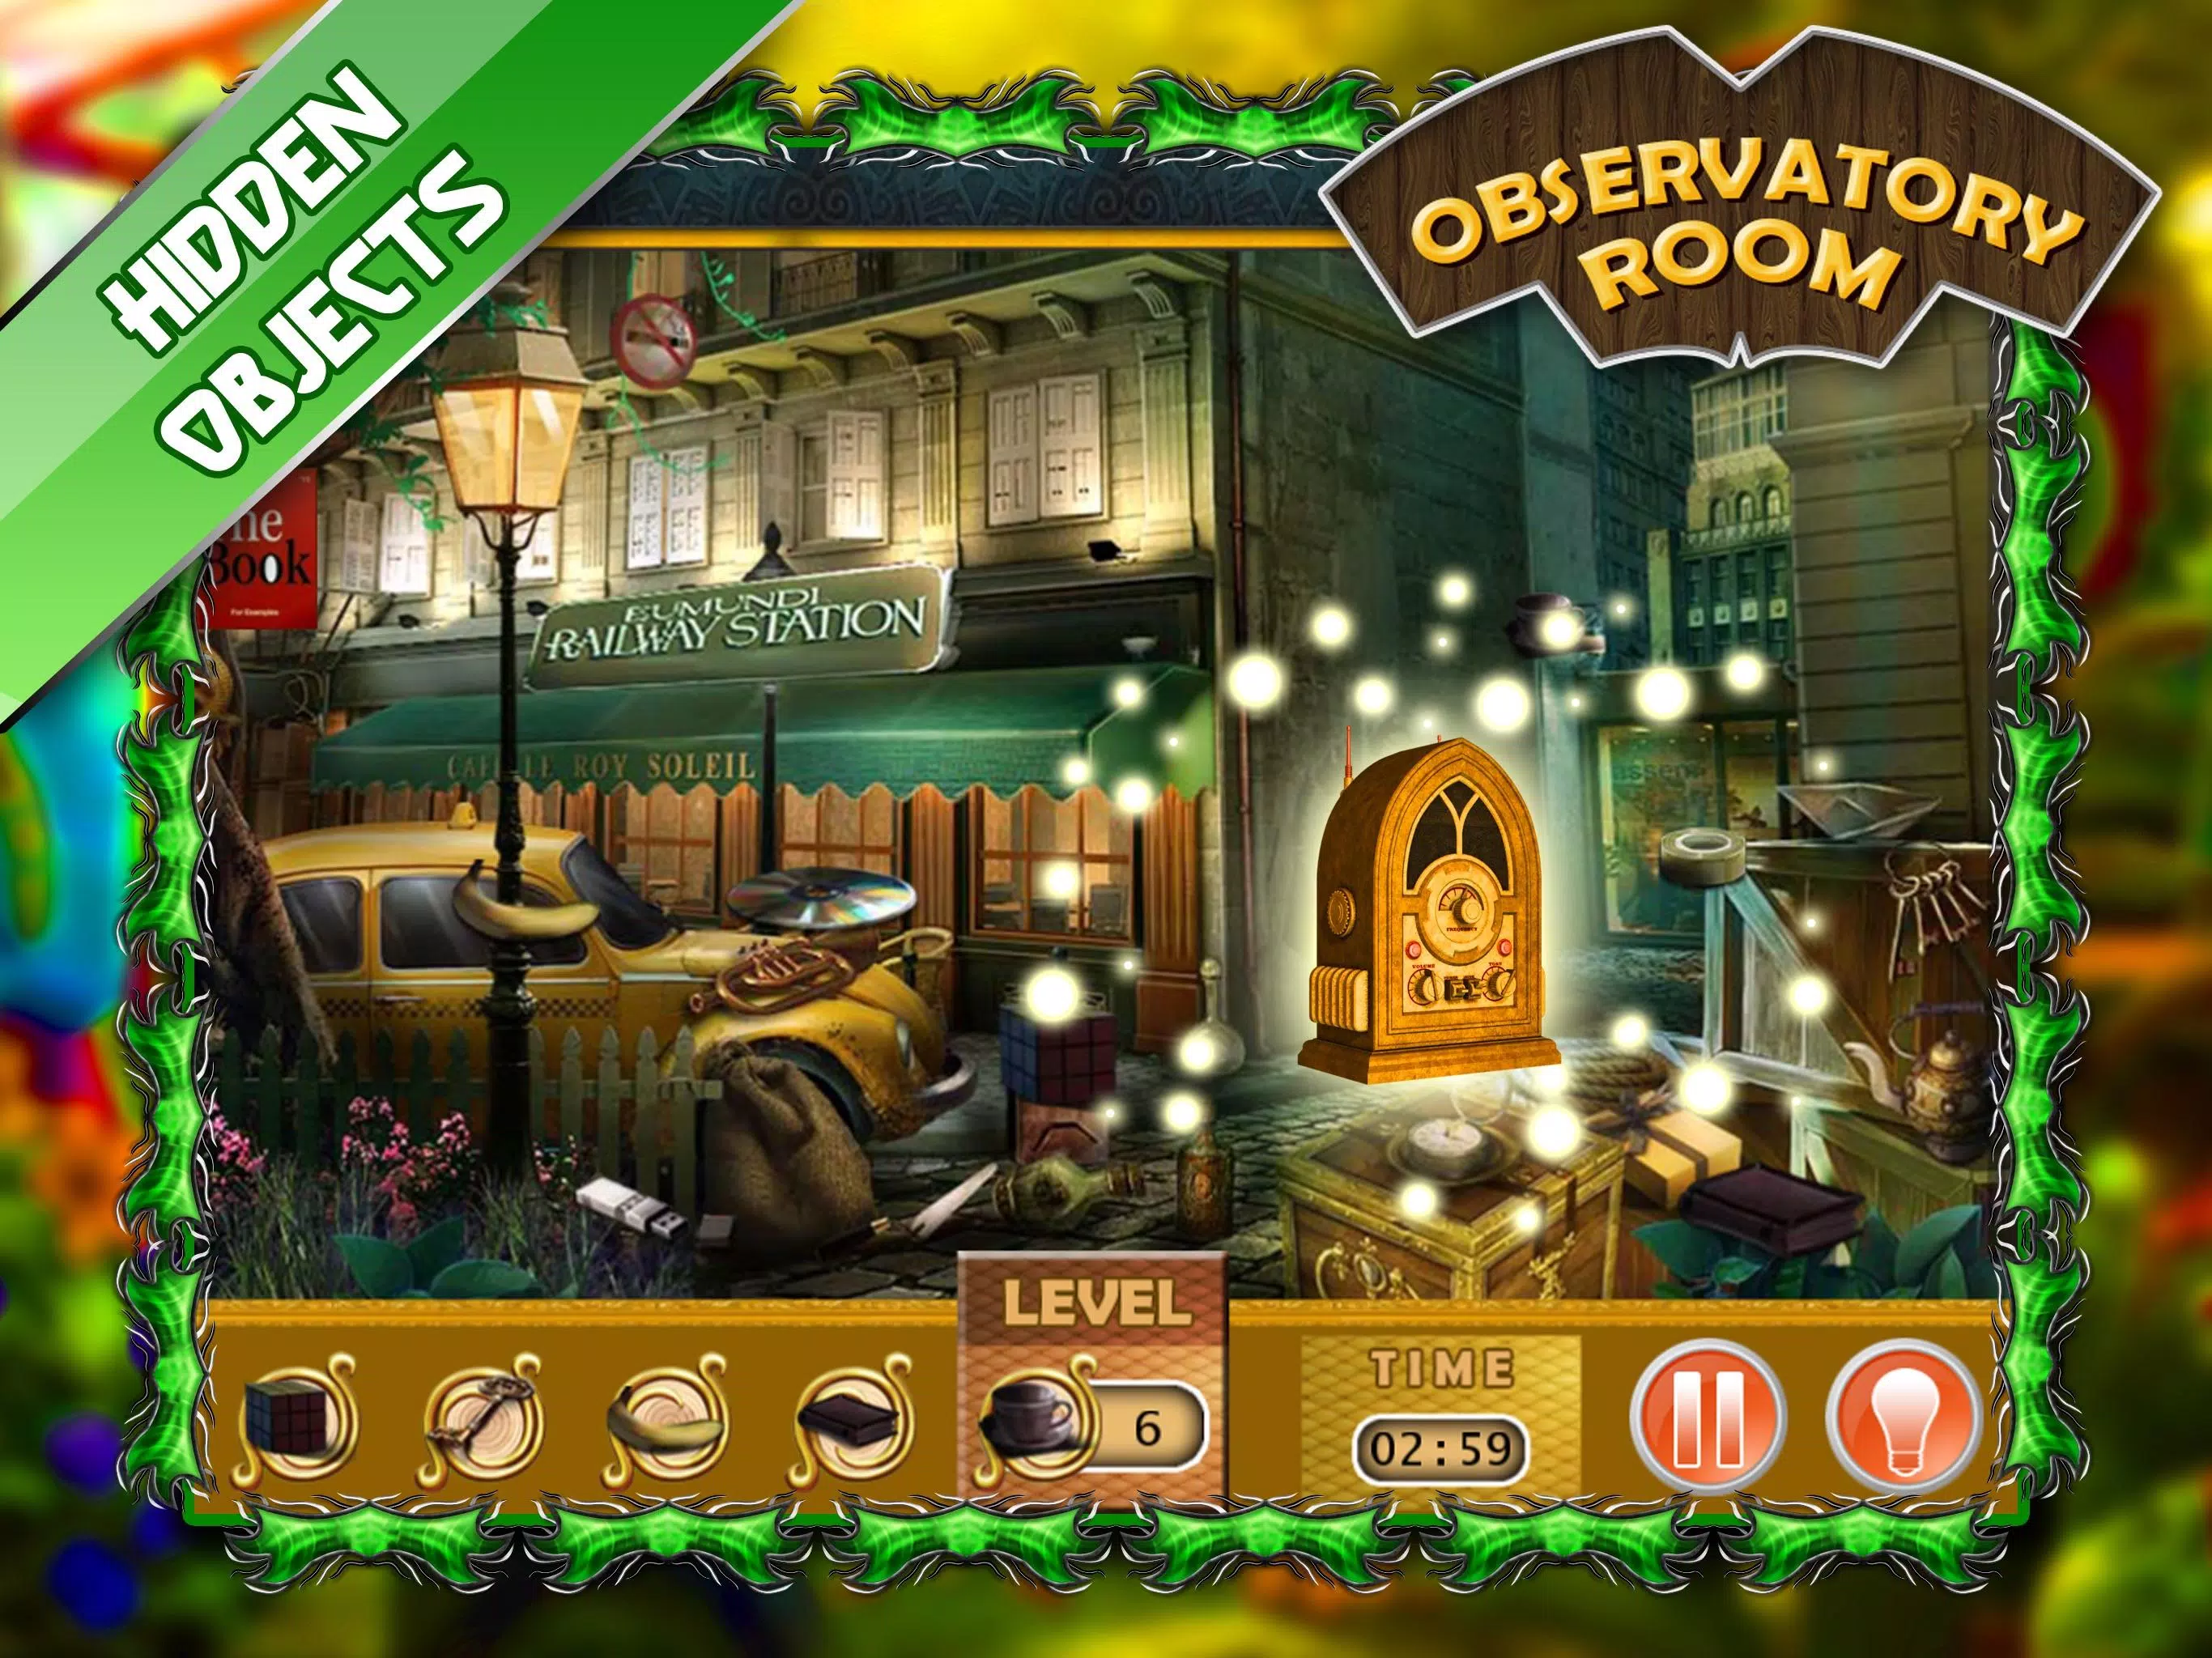 Play Free Hidden Object Puzzle Games: Free Online Hidden Object